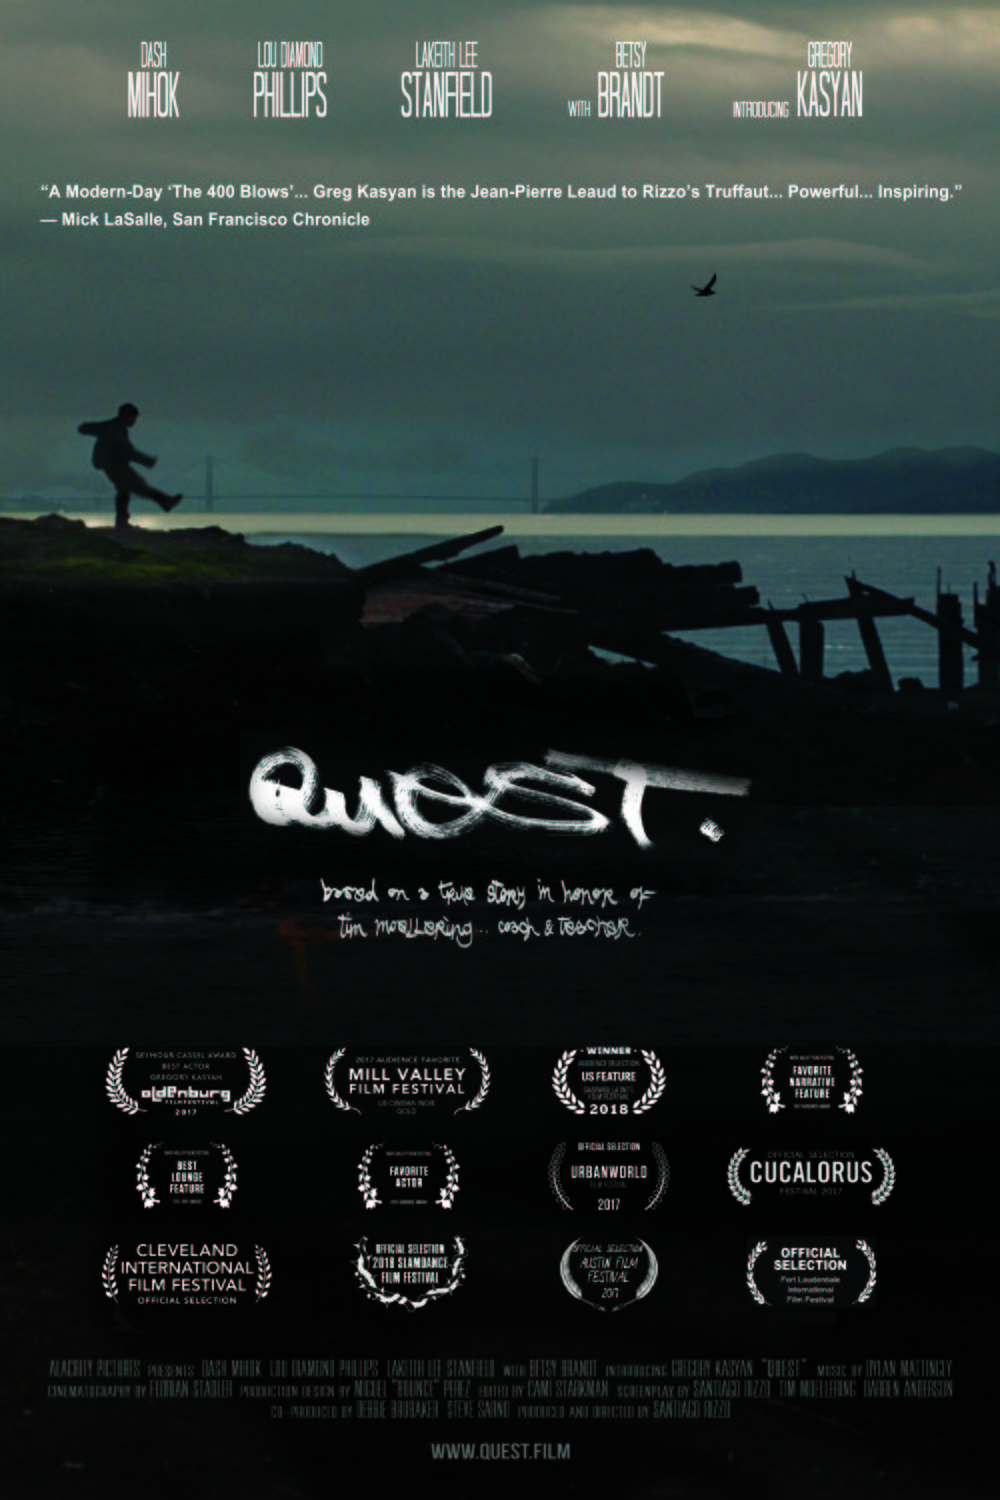 Poster of the movie Quest